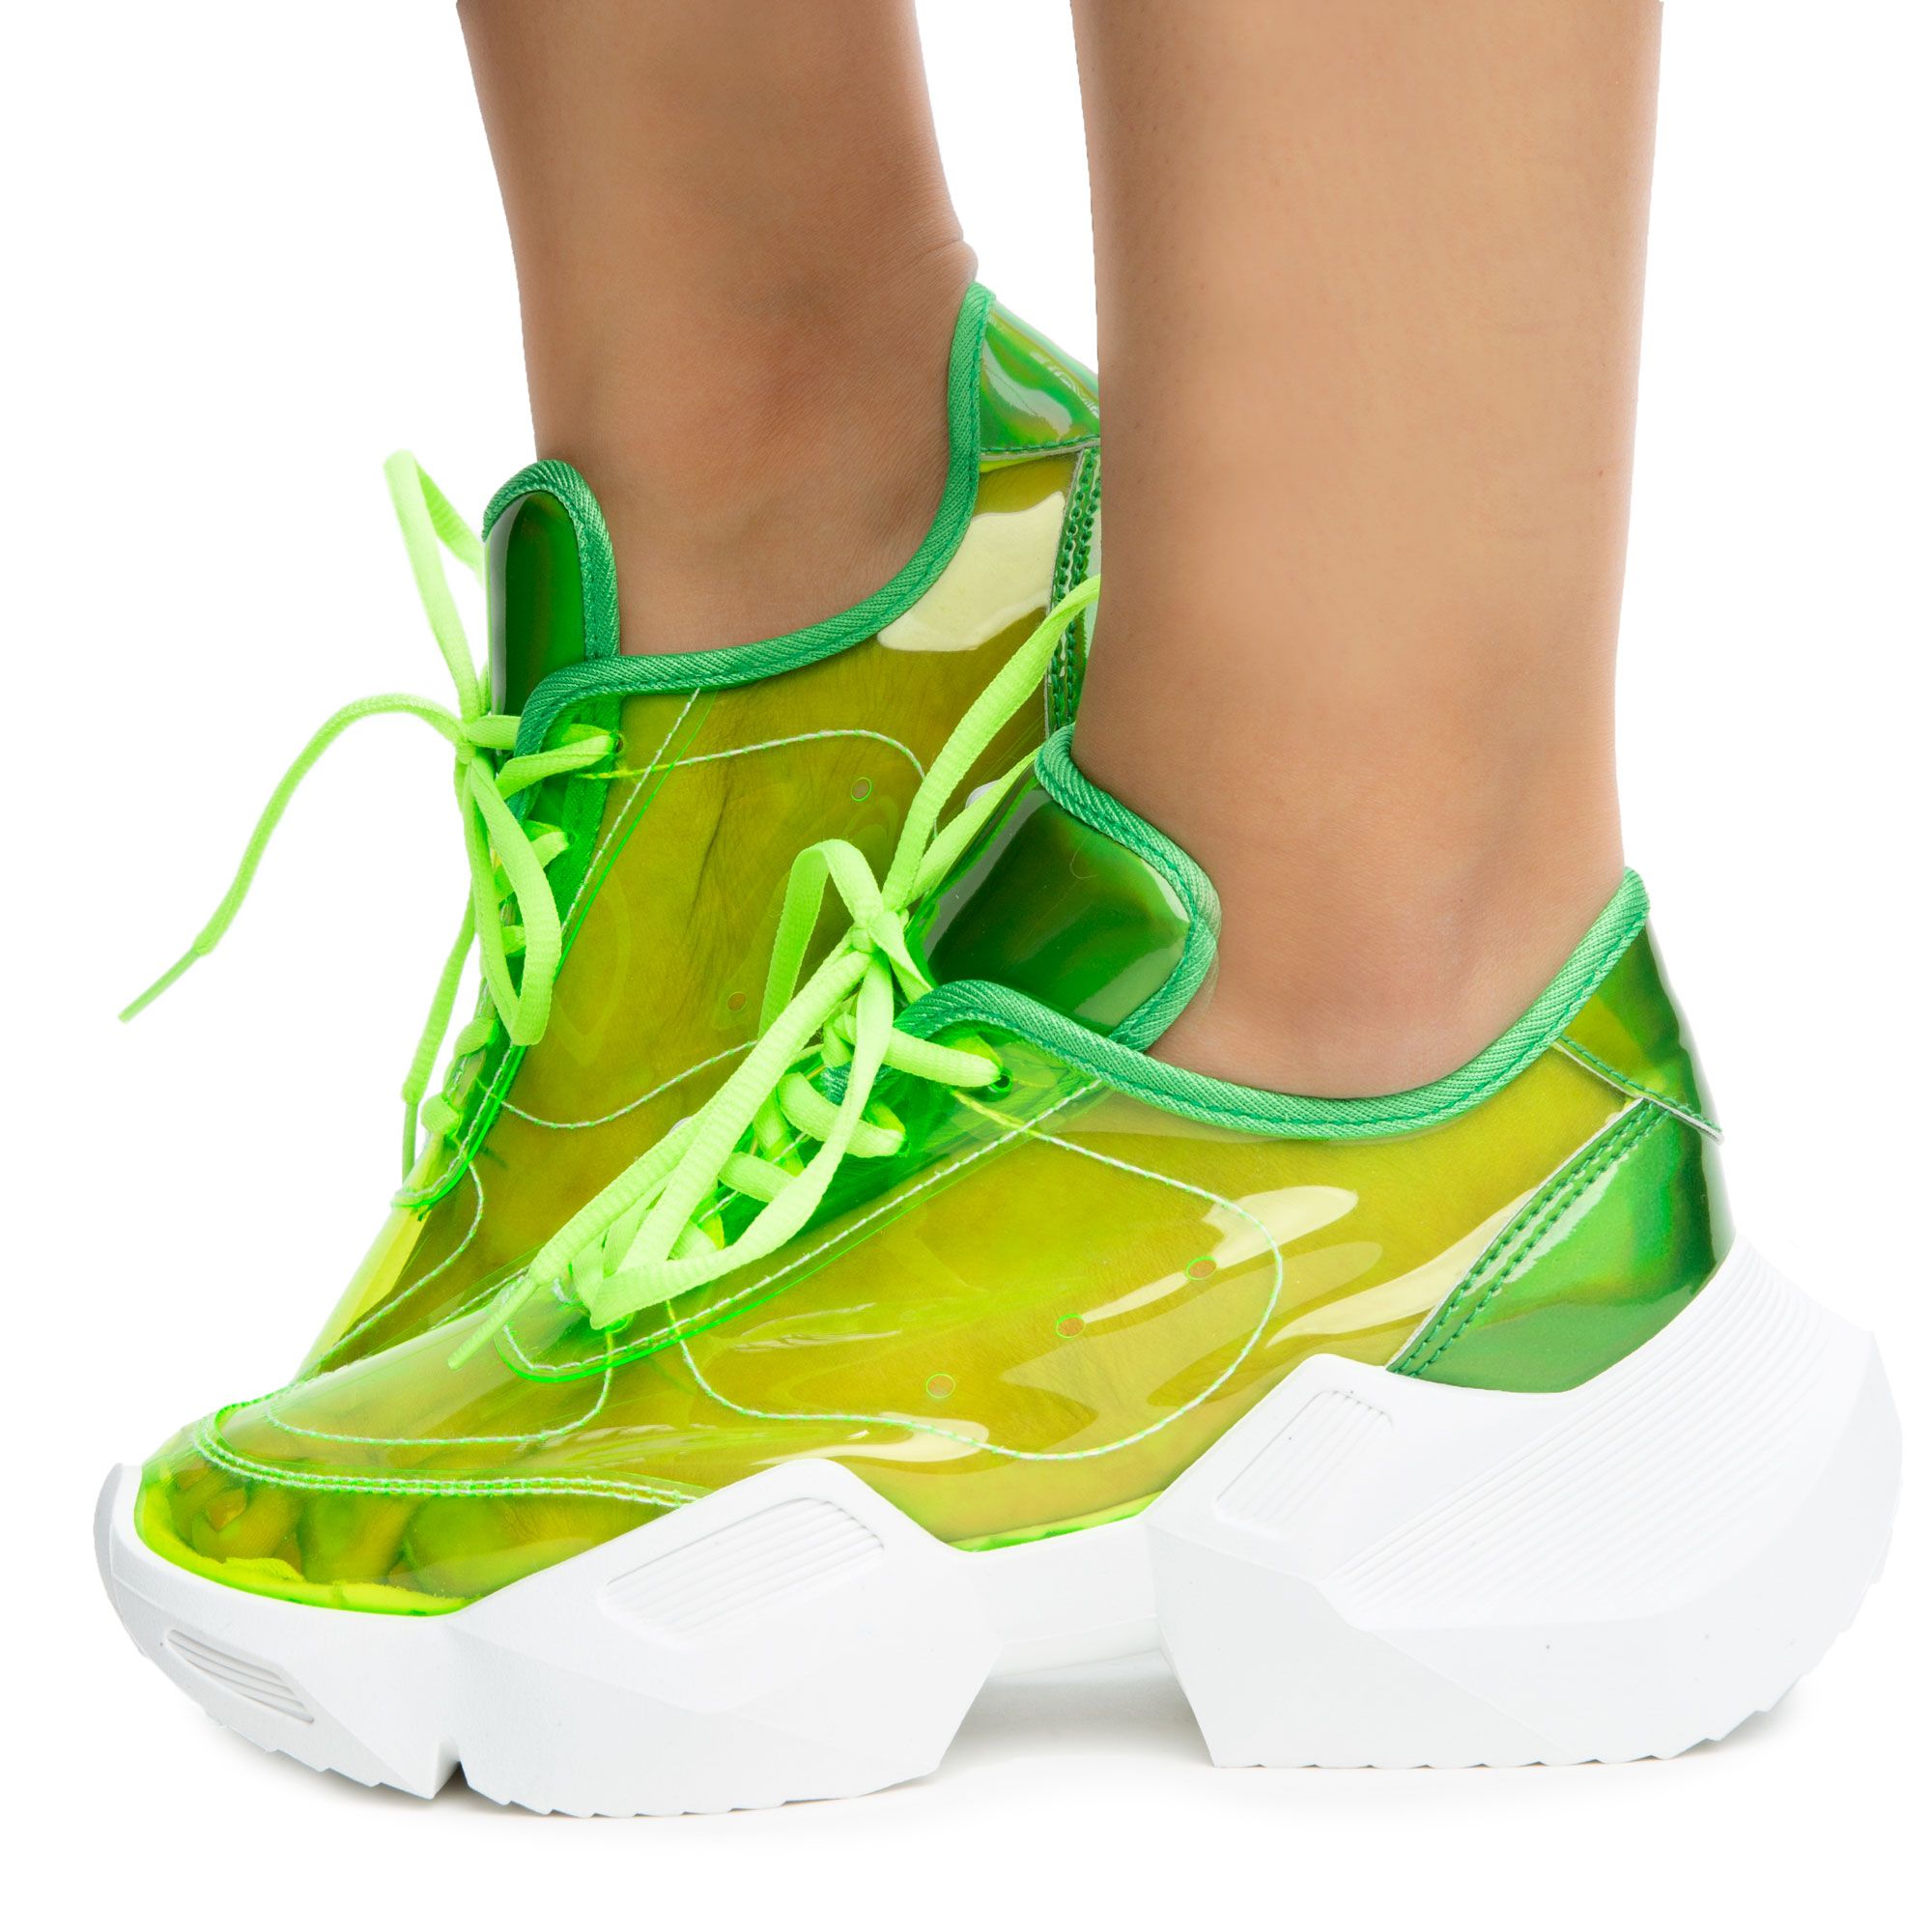 sneakers lime green